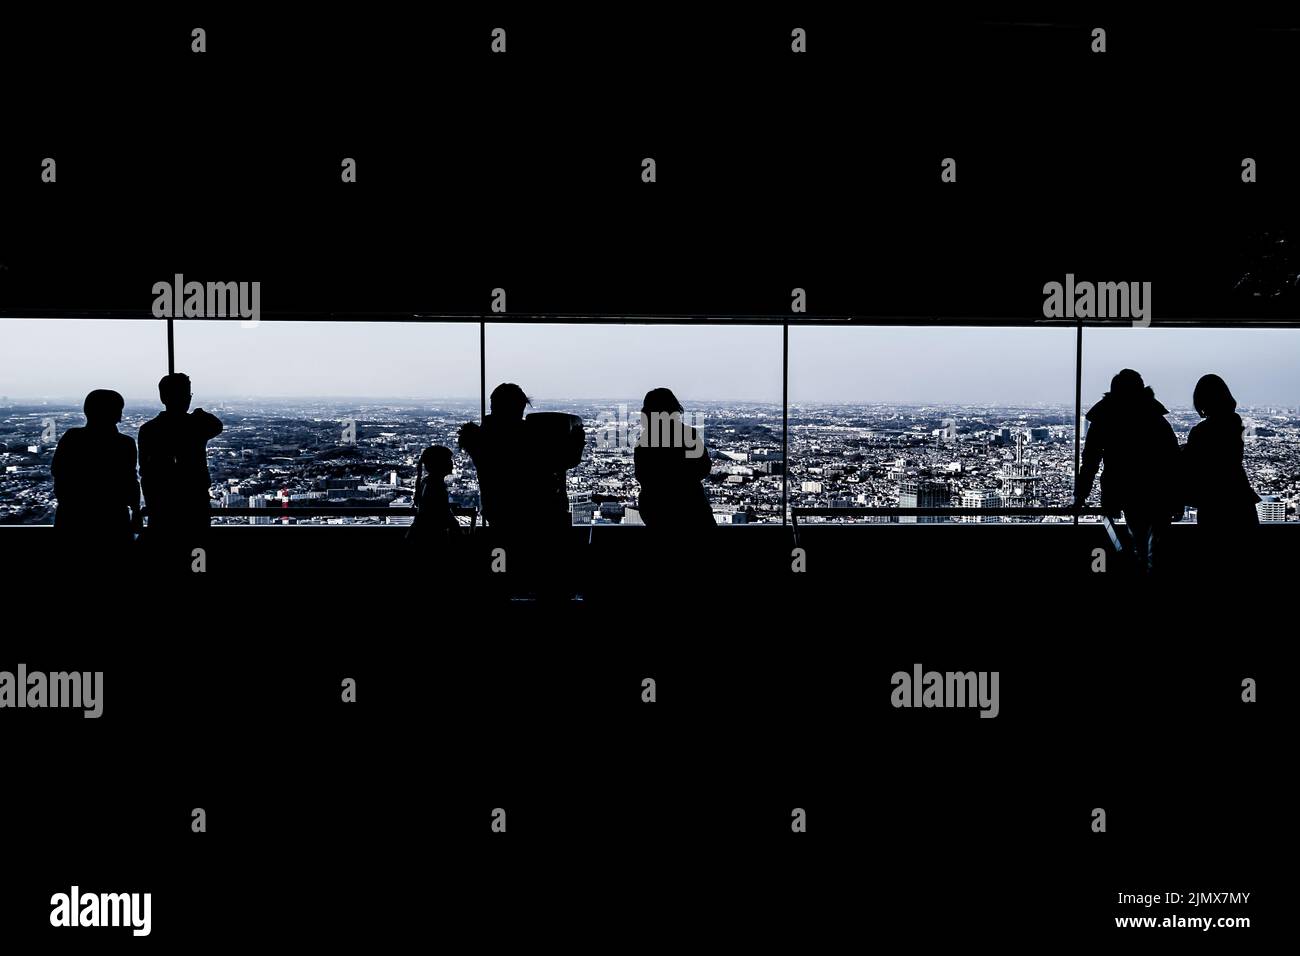 Silhouette of the observatory and the people of Landmark Tower Stock Photo